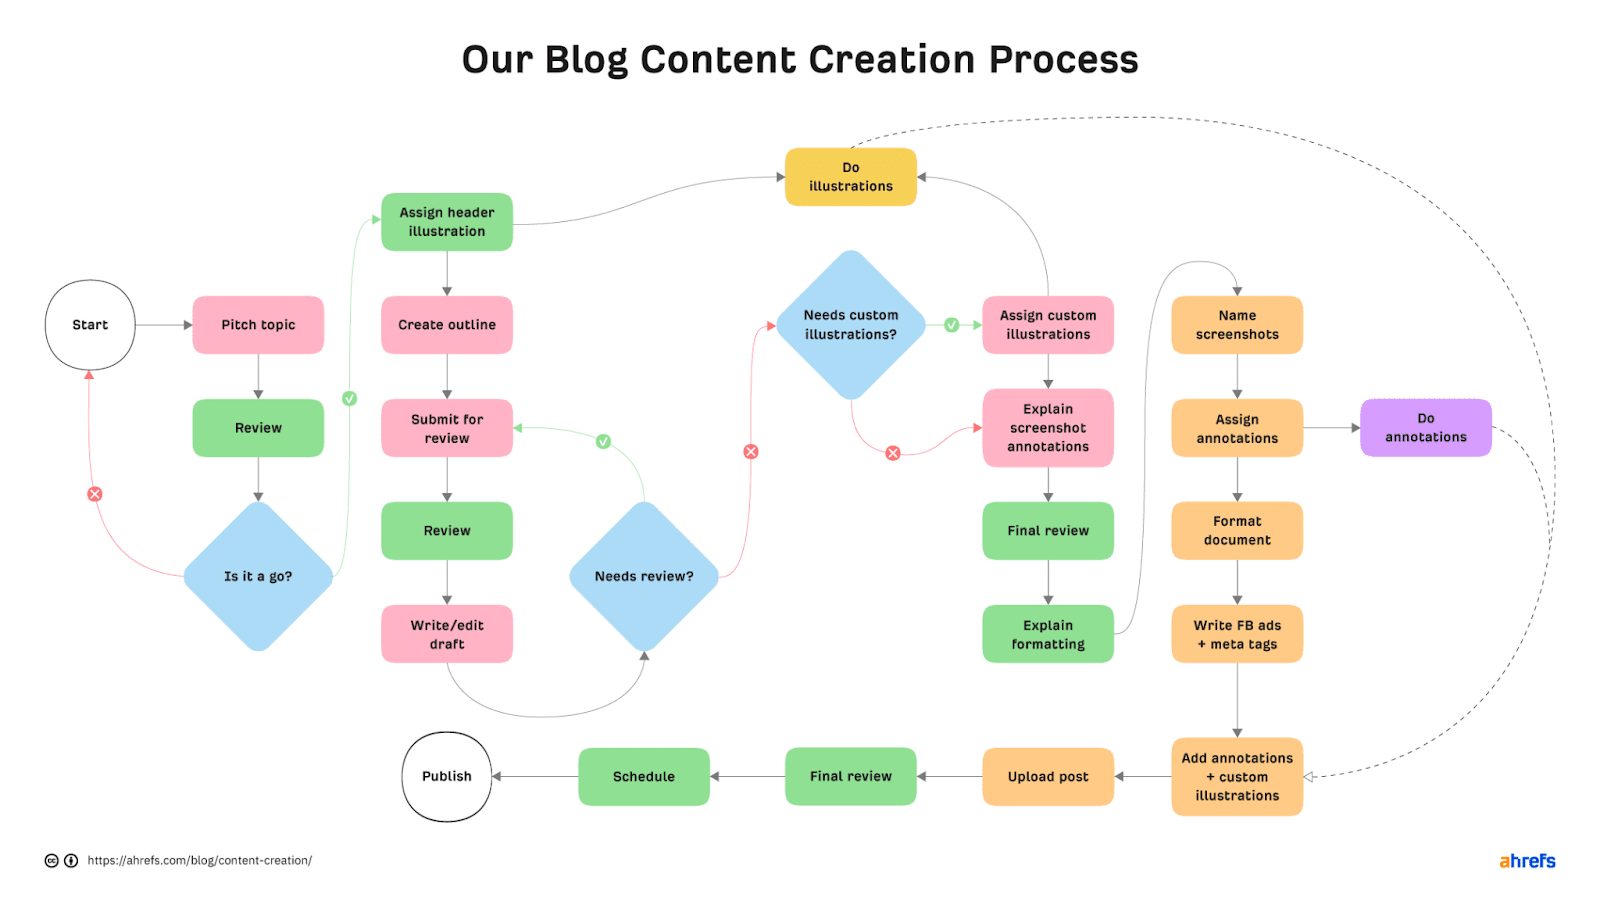 Ahrefs' chart on its blog creation process seo for startups